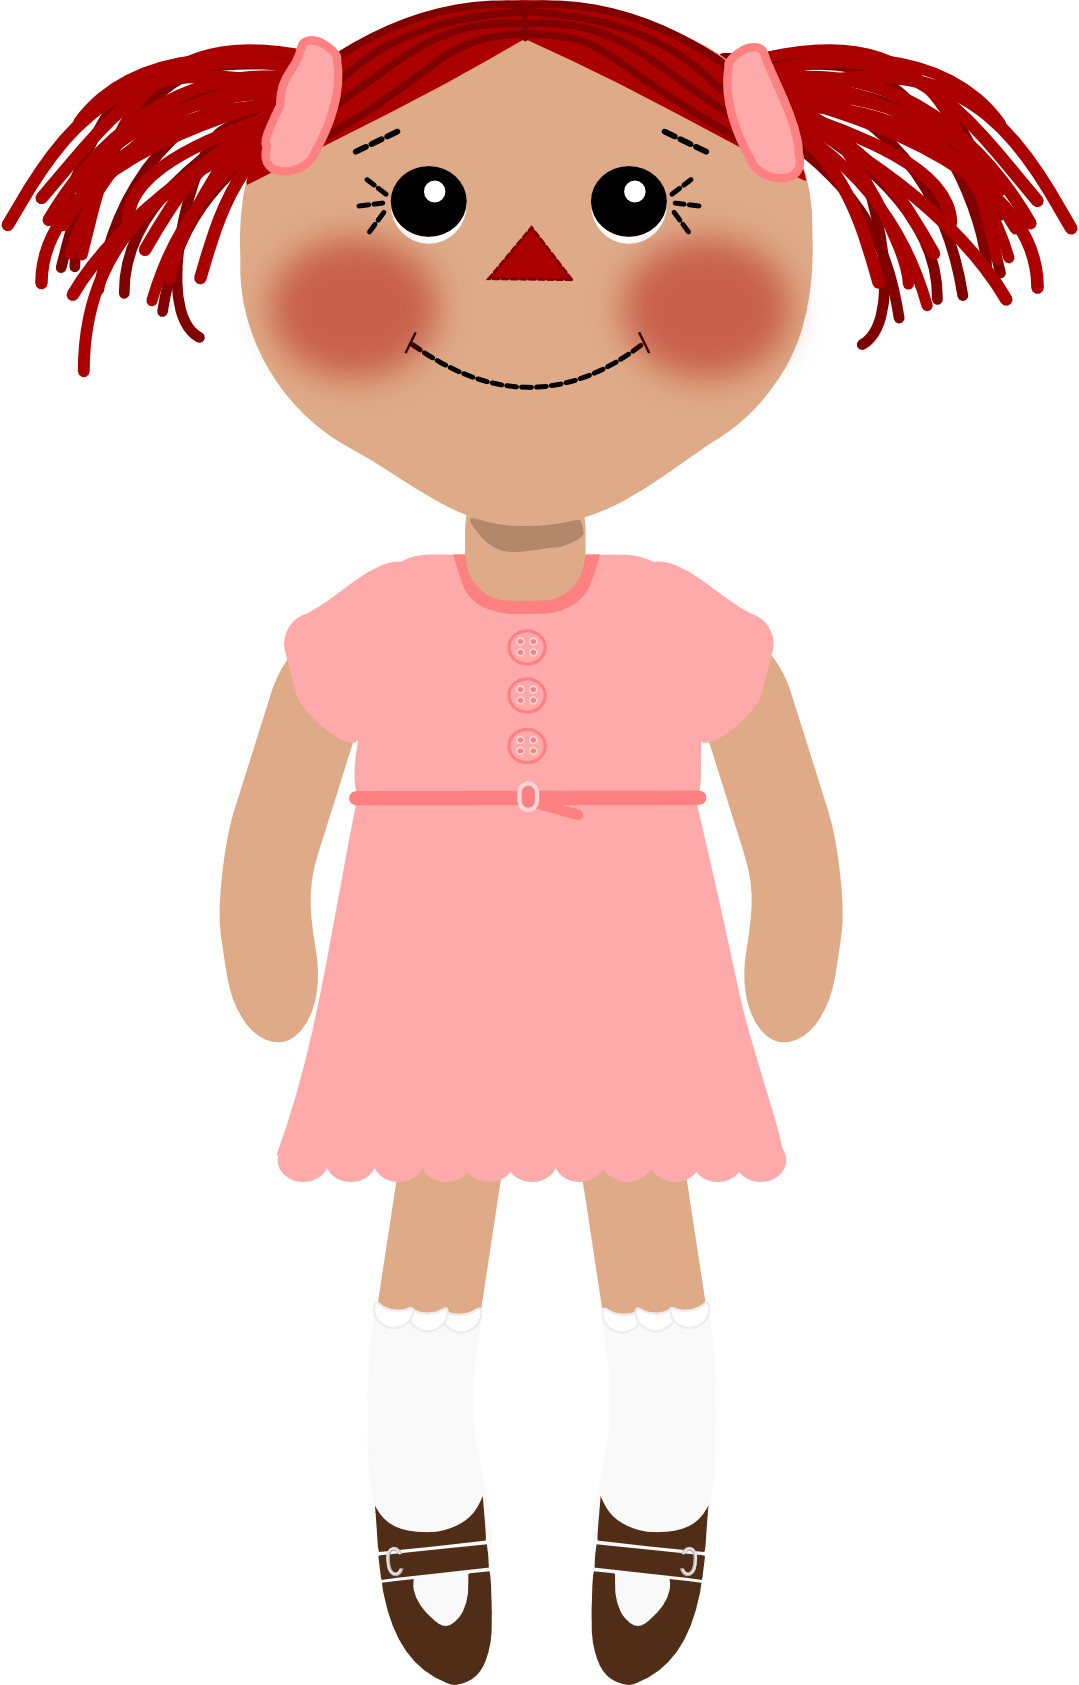 A Cartoon Doll With Pigtails